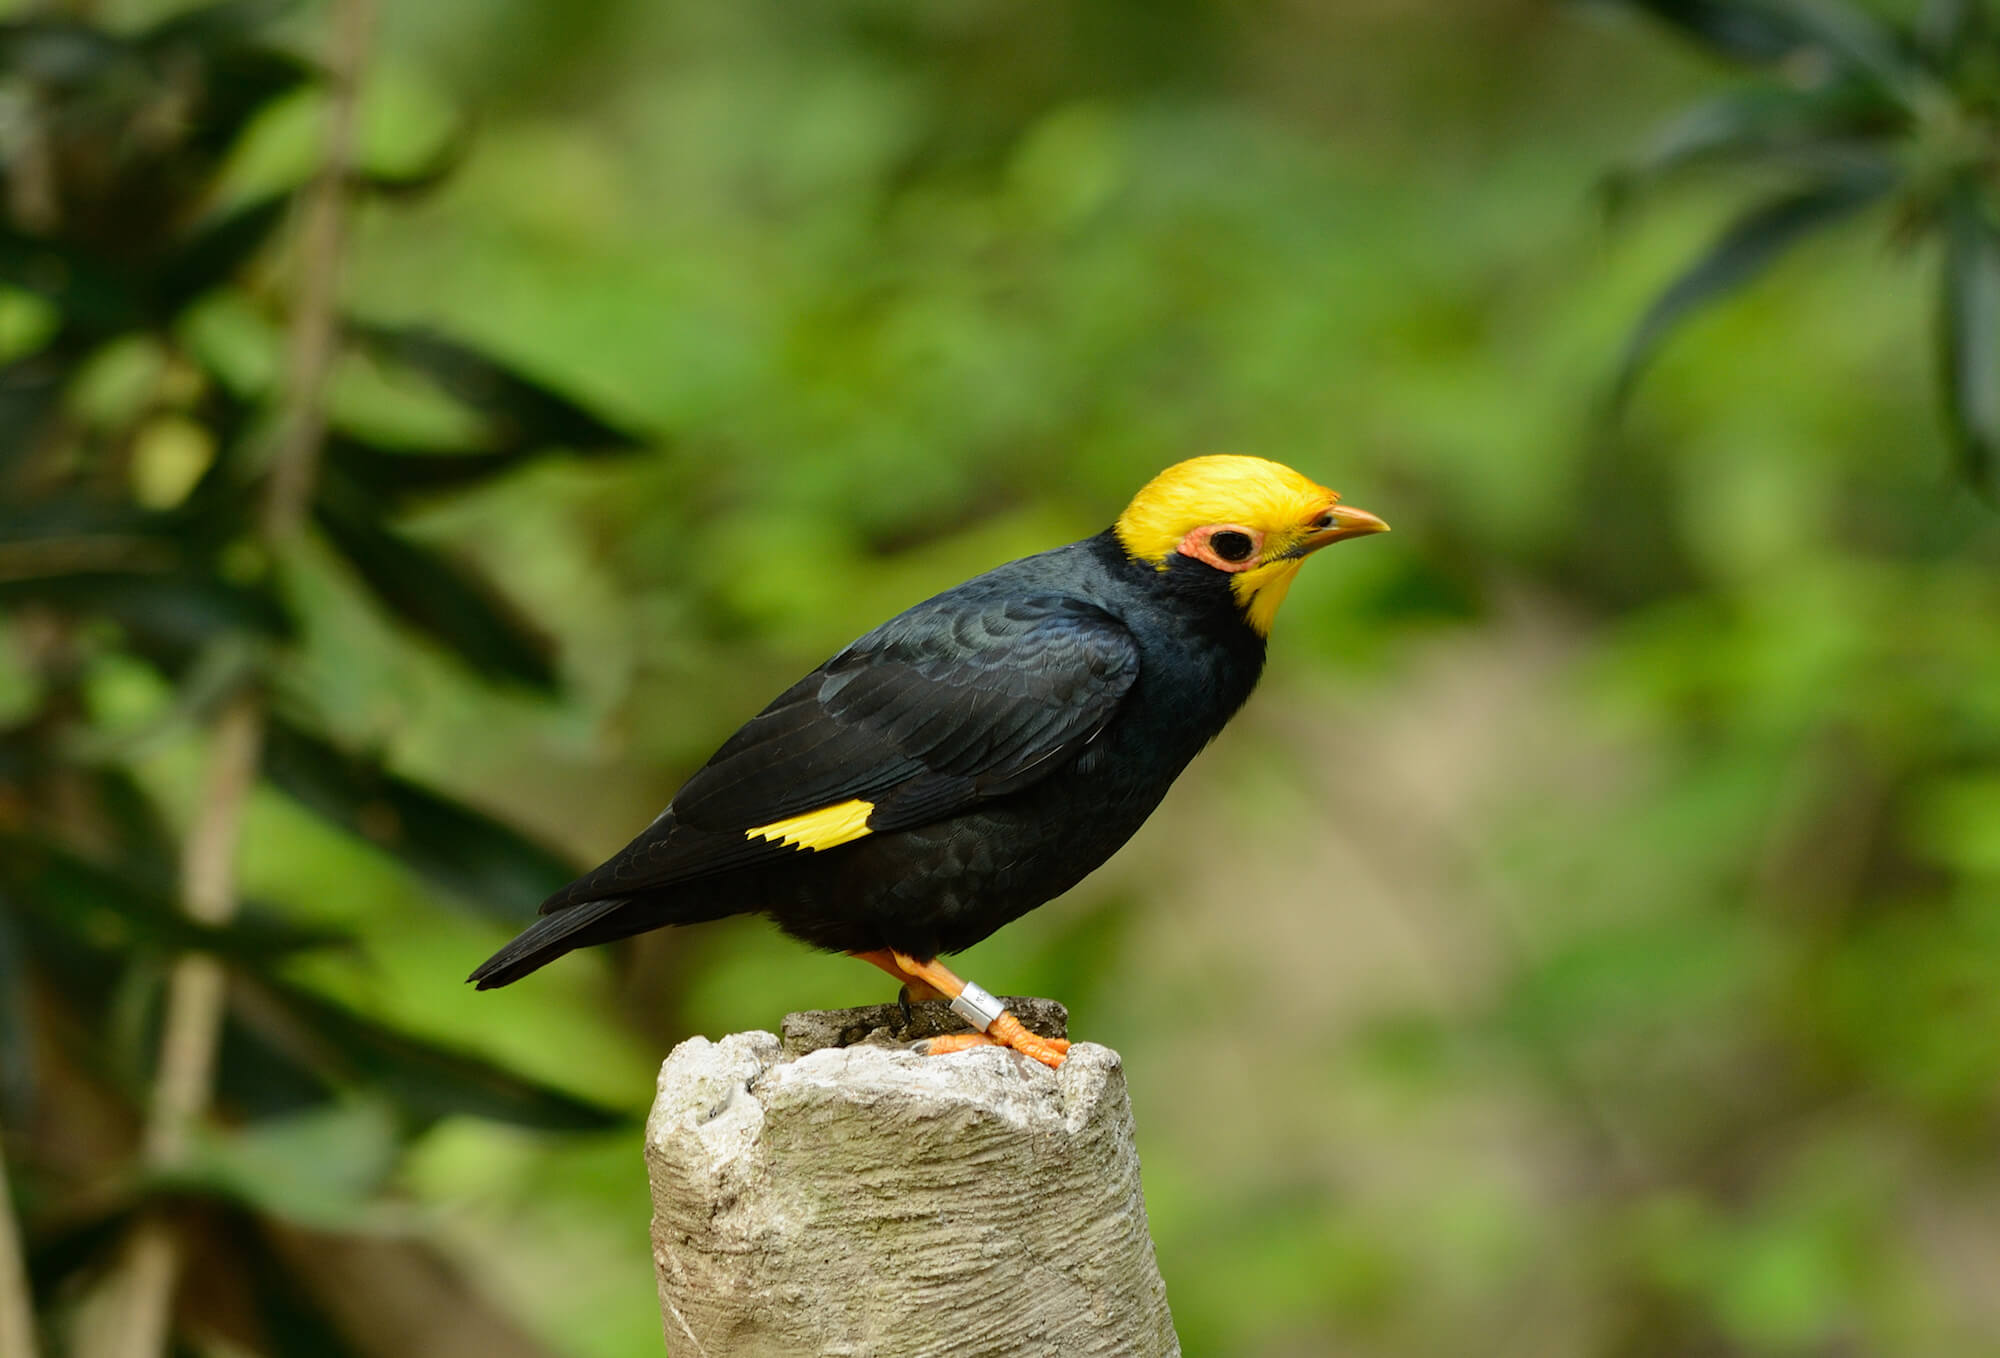 Golden-crested Myna perched on a wooden stump